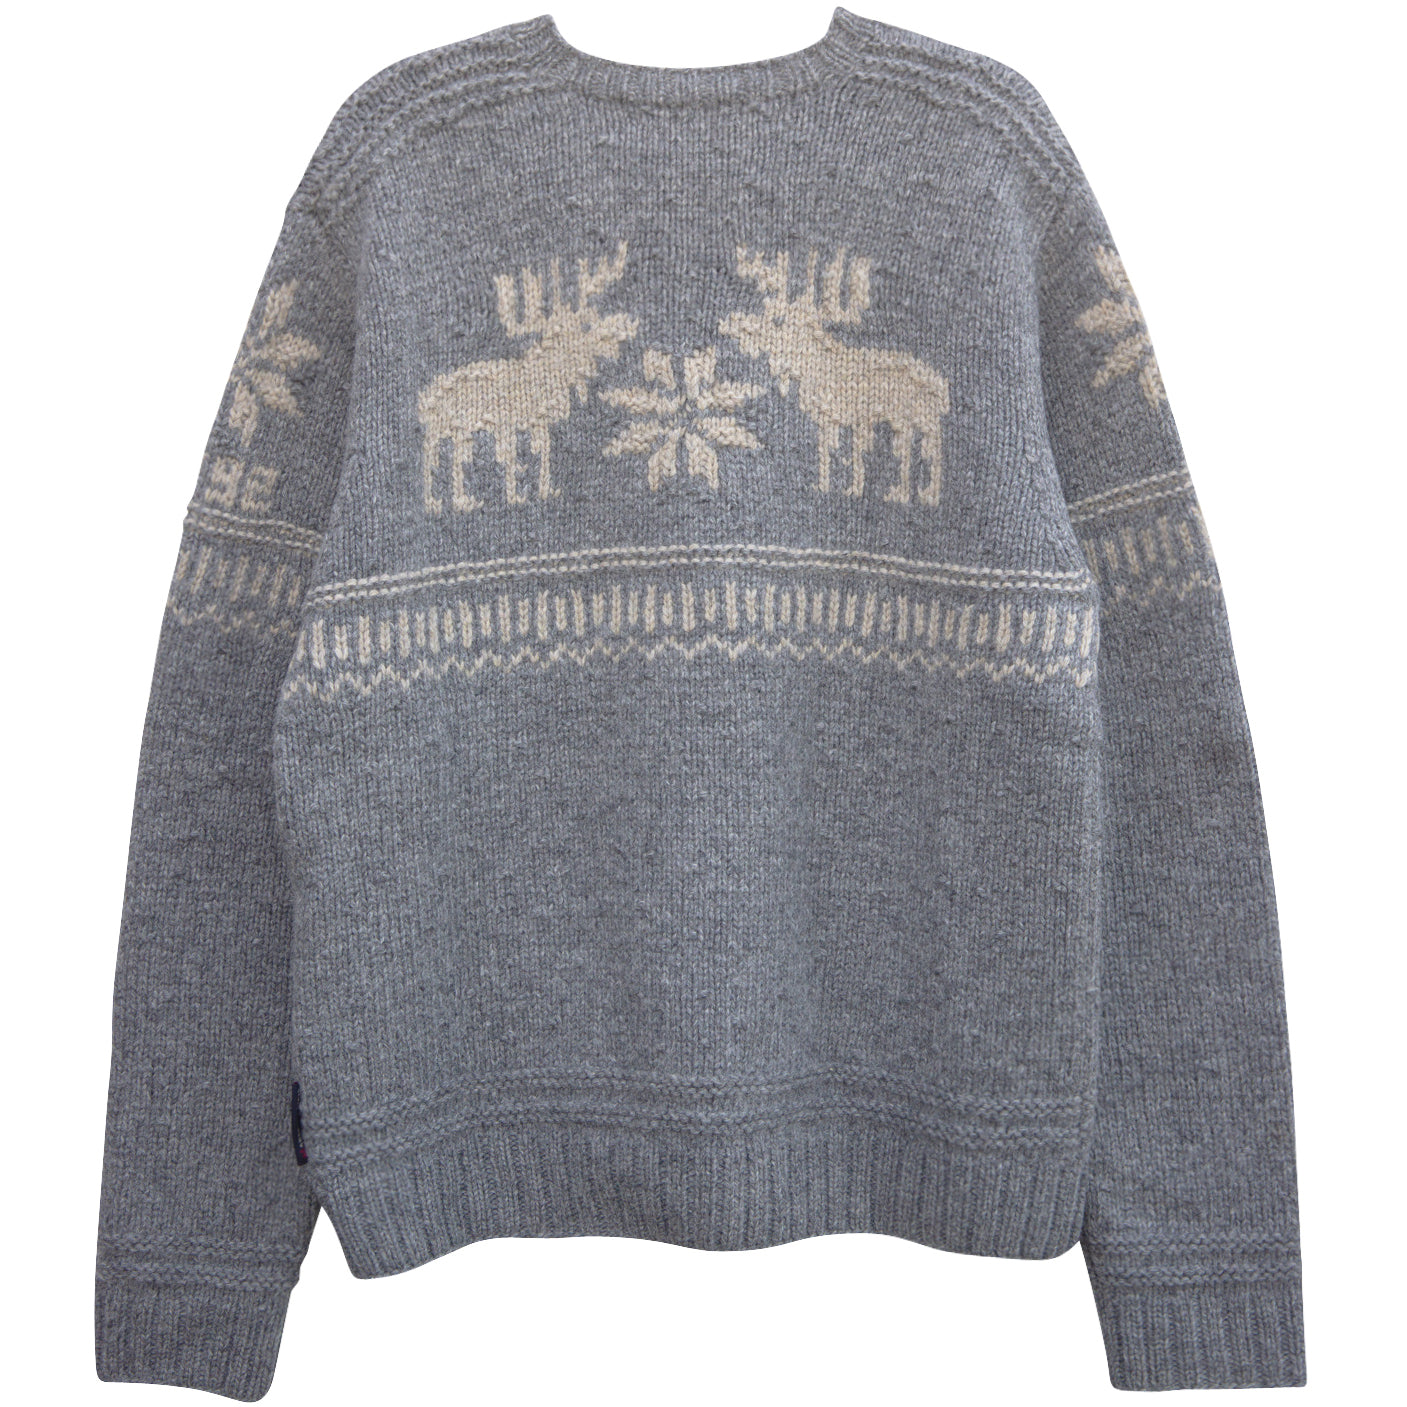 ABERCROMBIE AND FITCH SWEATER